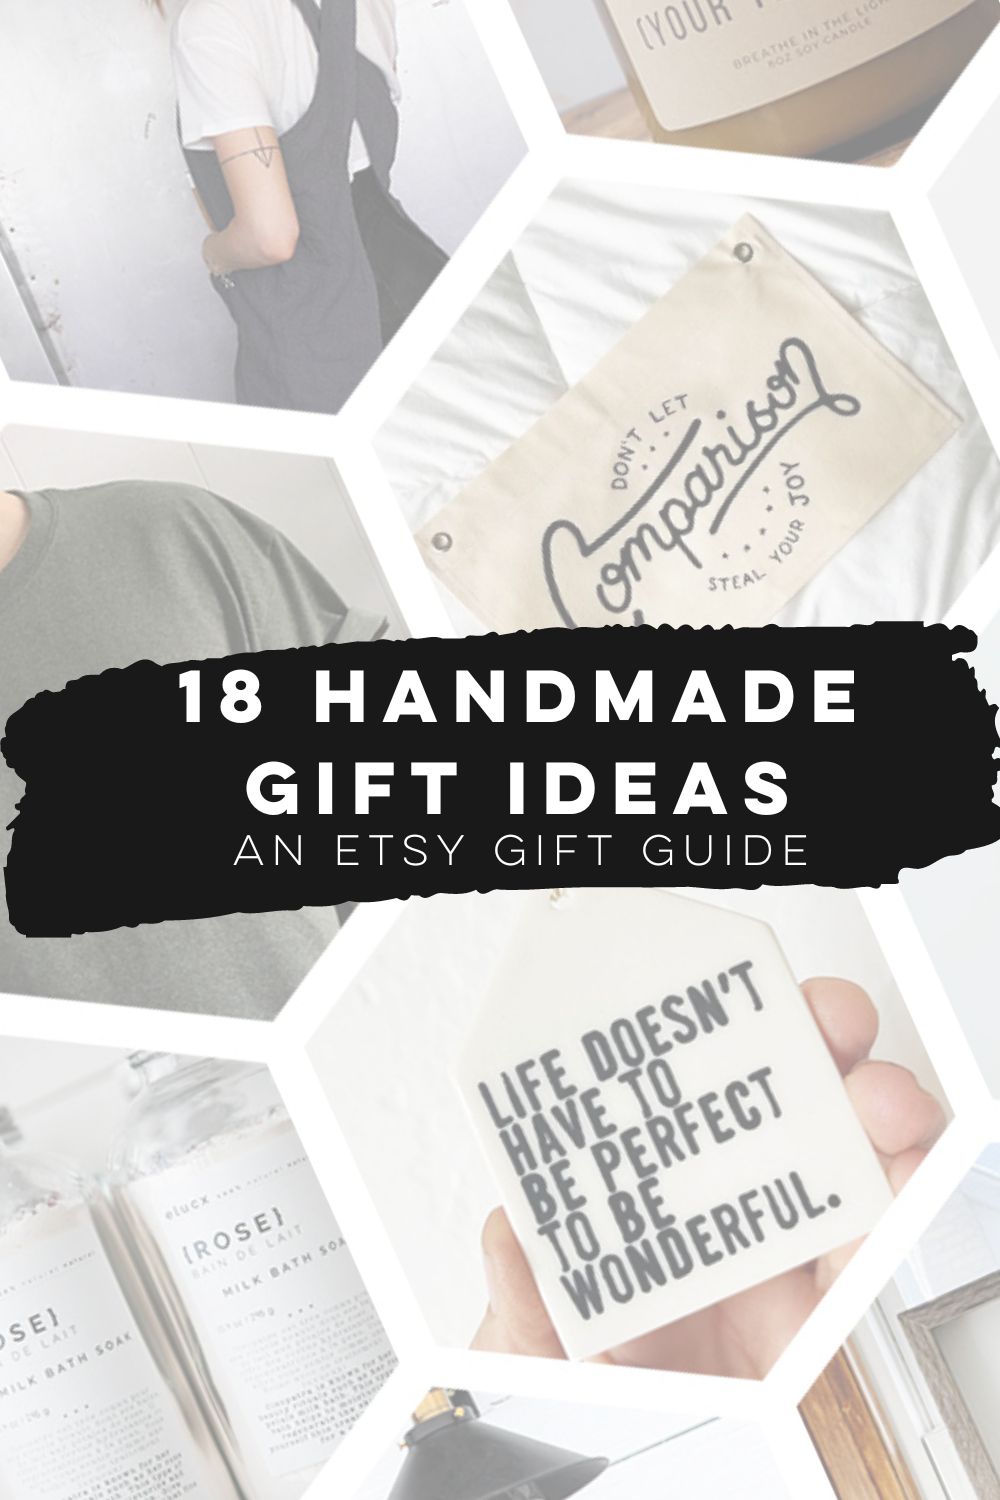 Holiday Gift Guide from Etsy